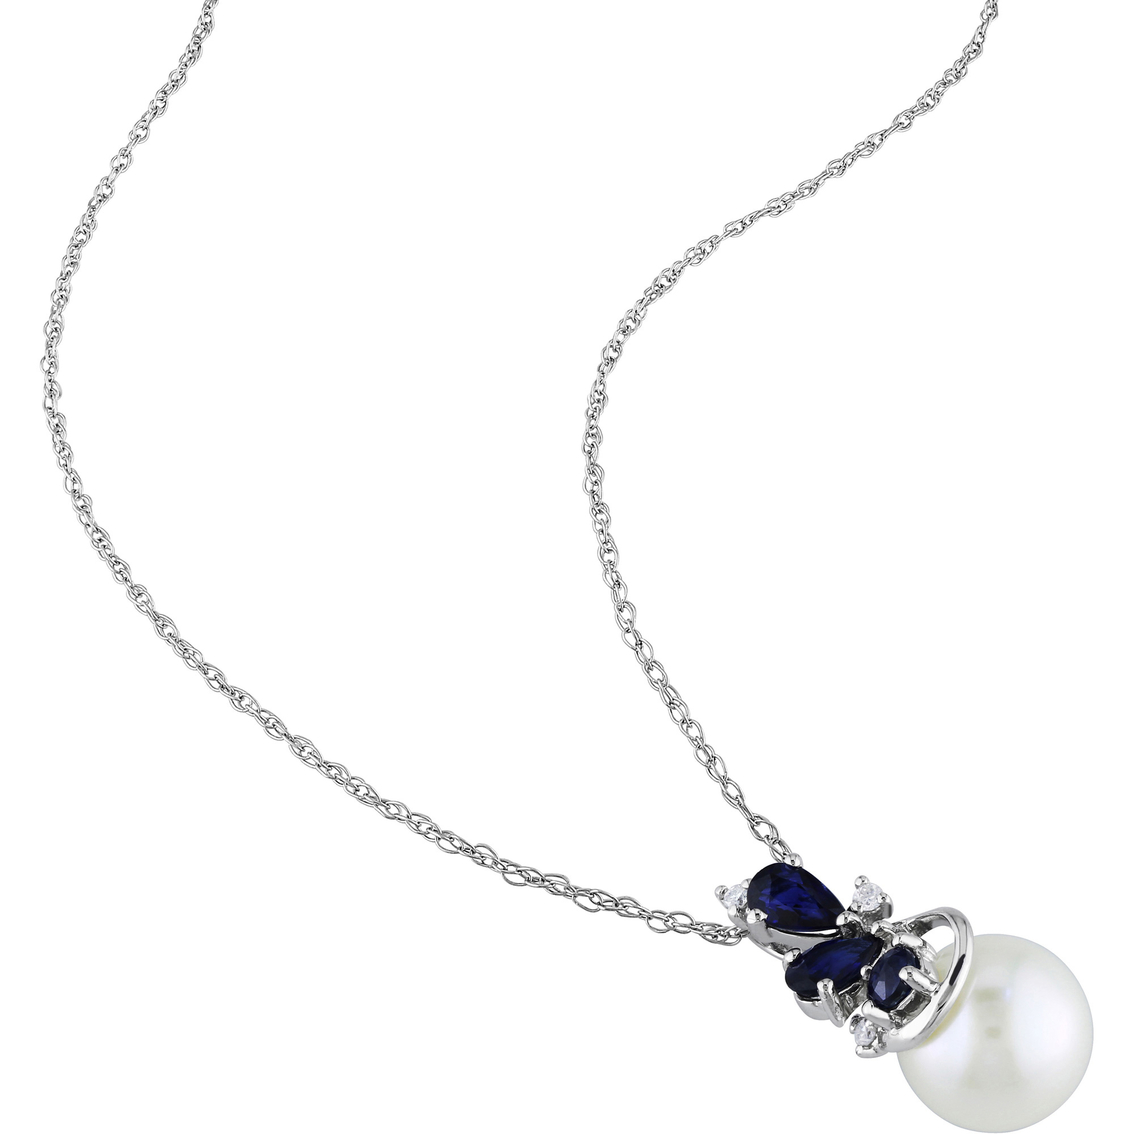 Sofia B. 10K White Gold Cultured Pearl Sapphire Diamond Earrings and Necklace - Image 2 of 3